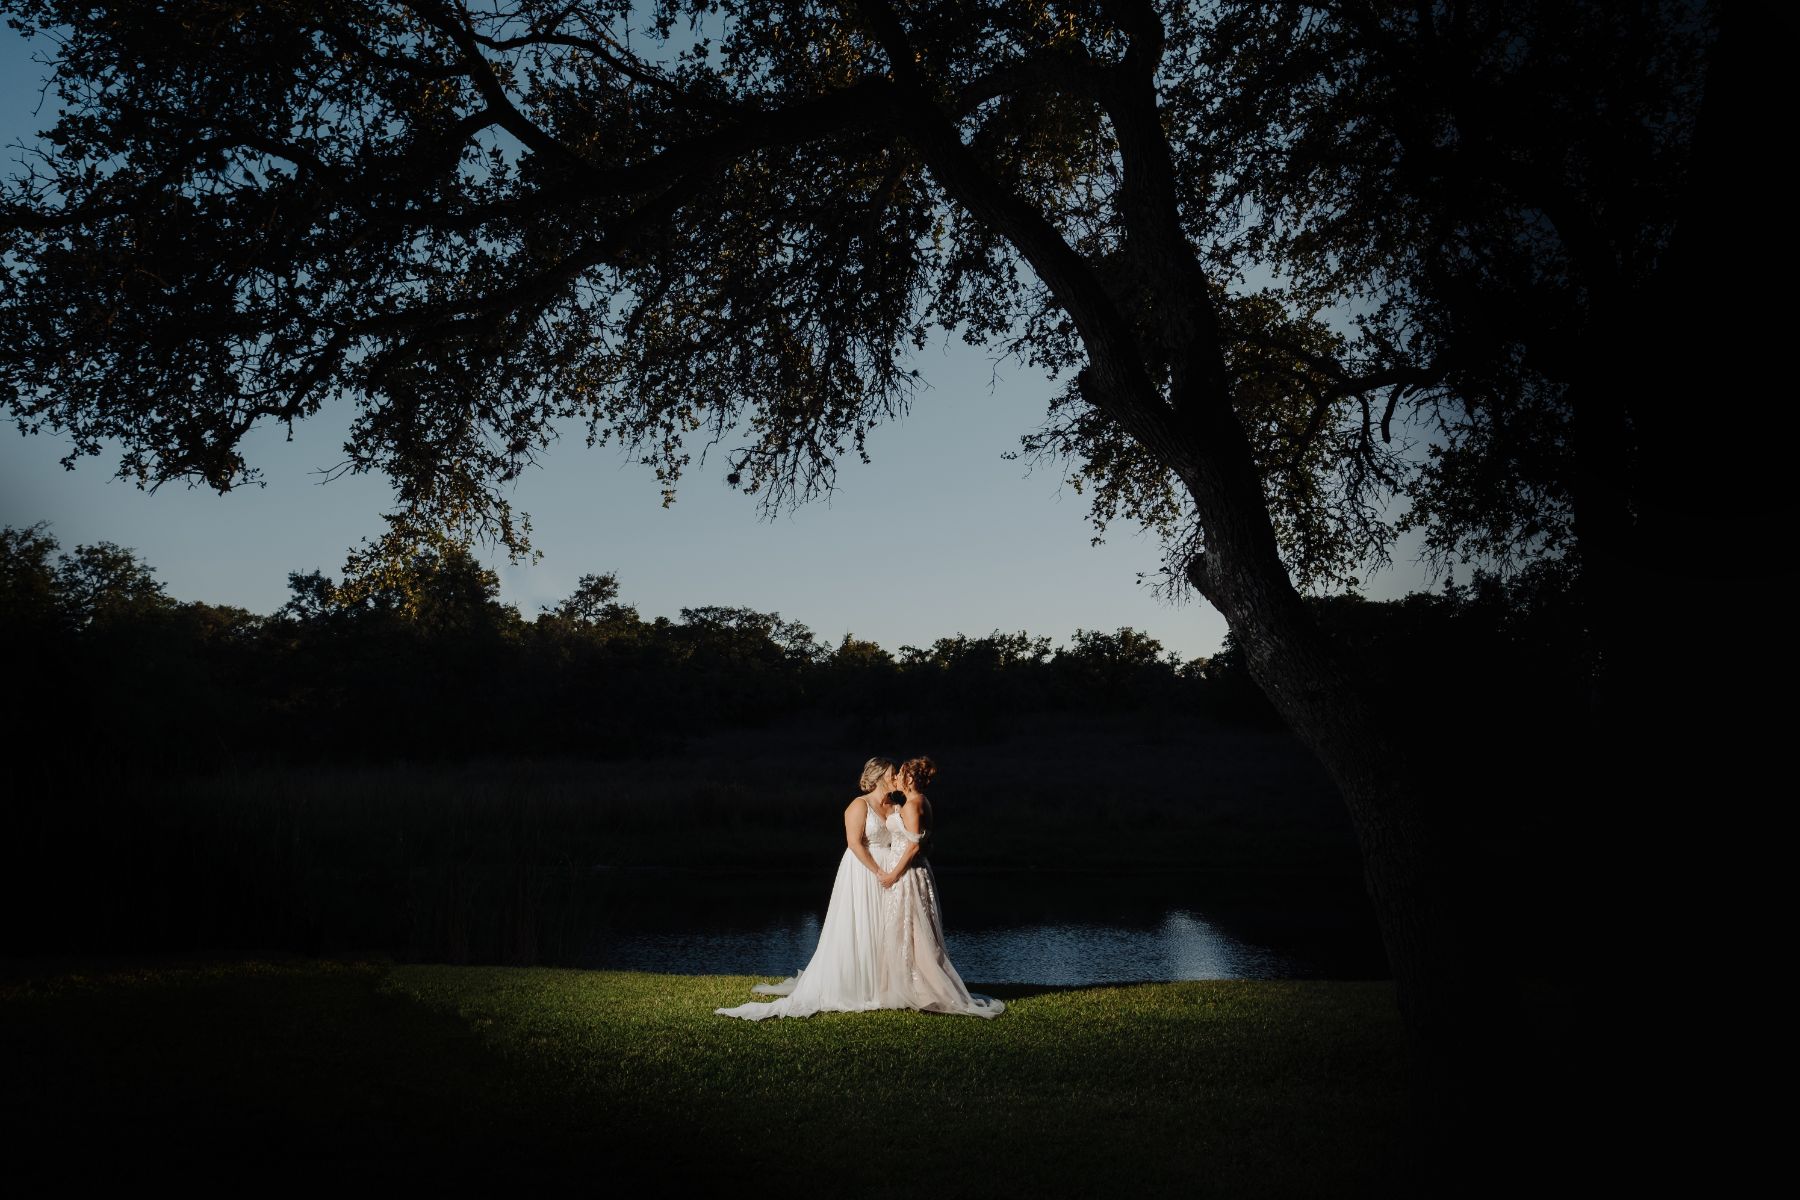 Two brides hold hands and kiss under large oak trees with the sun setting over the horizon and a pond in the background.